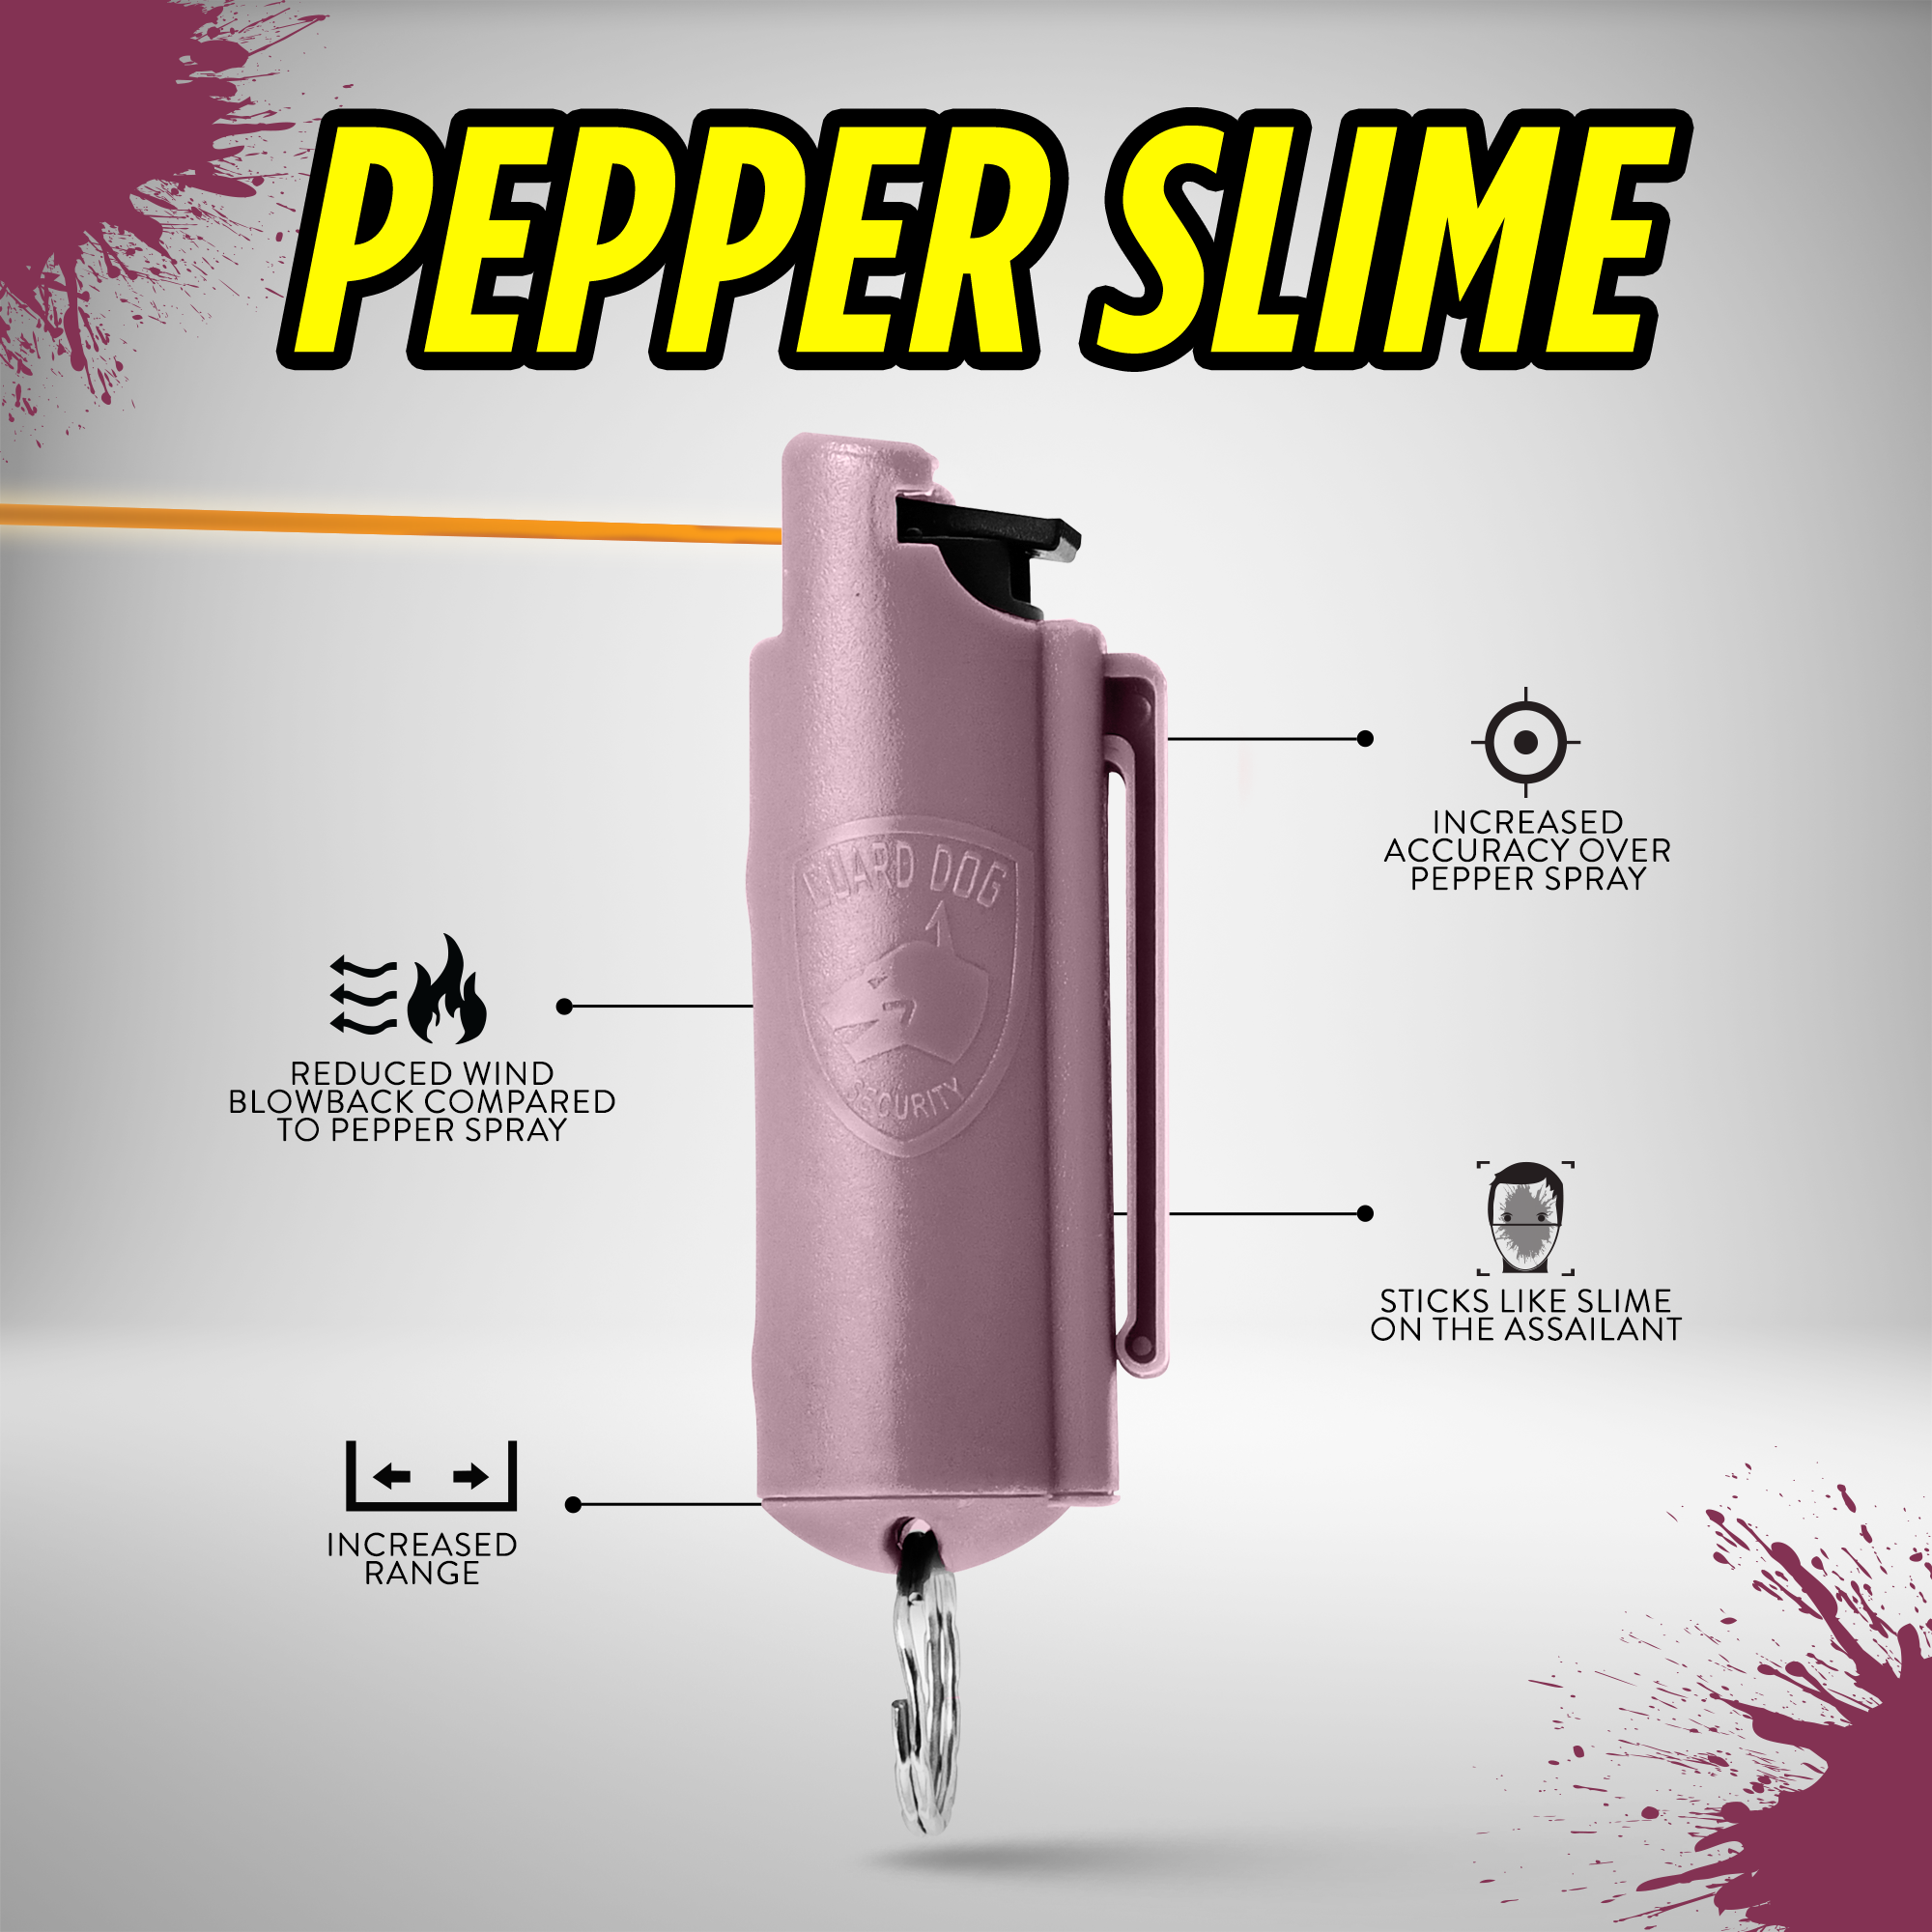 Quick Action Pepper Slime - Pepper Spray Keychain with Belt Clip - The ultimate self-defense tool for both women and men